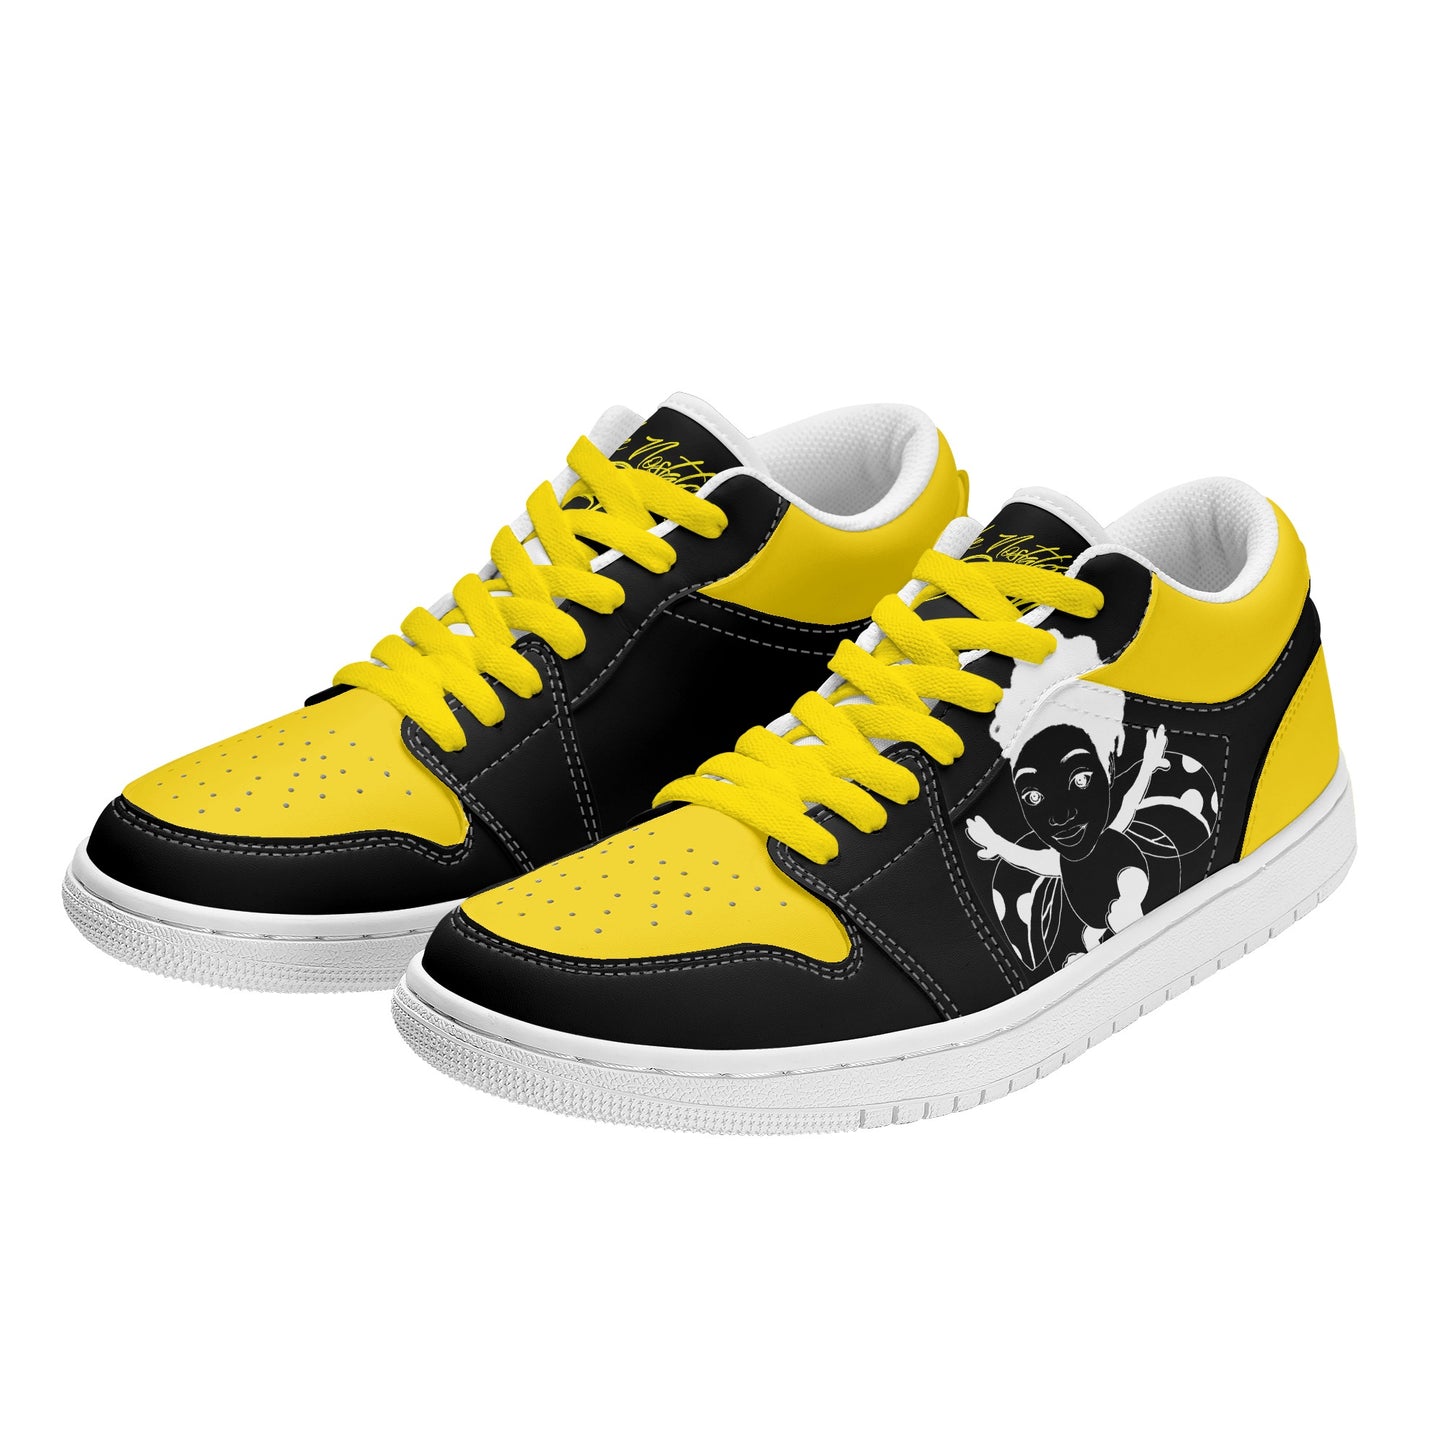 Dnt Juge My Different Low Top Skateboard Sneakers